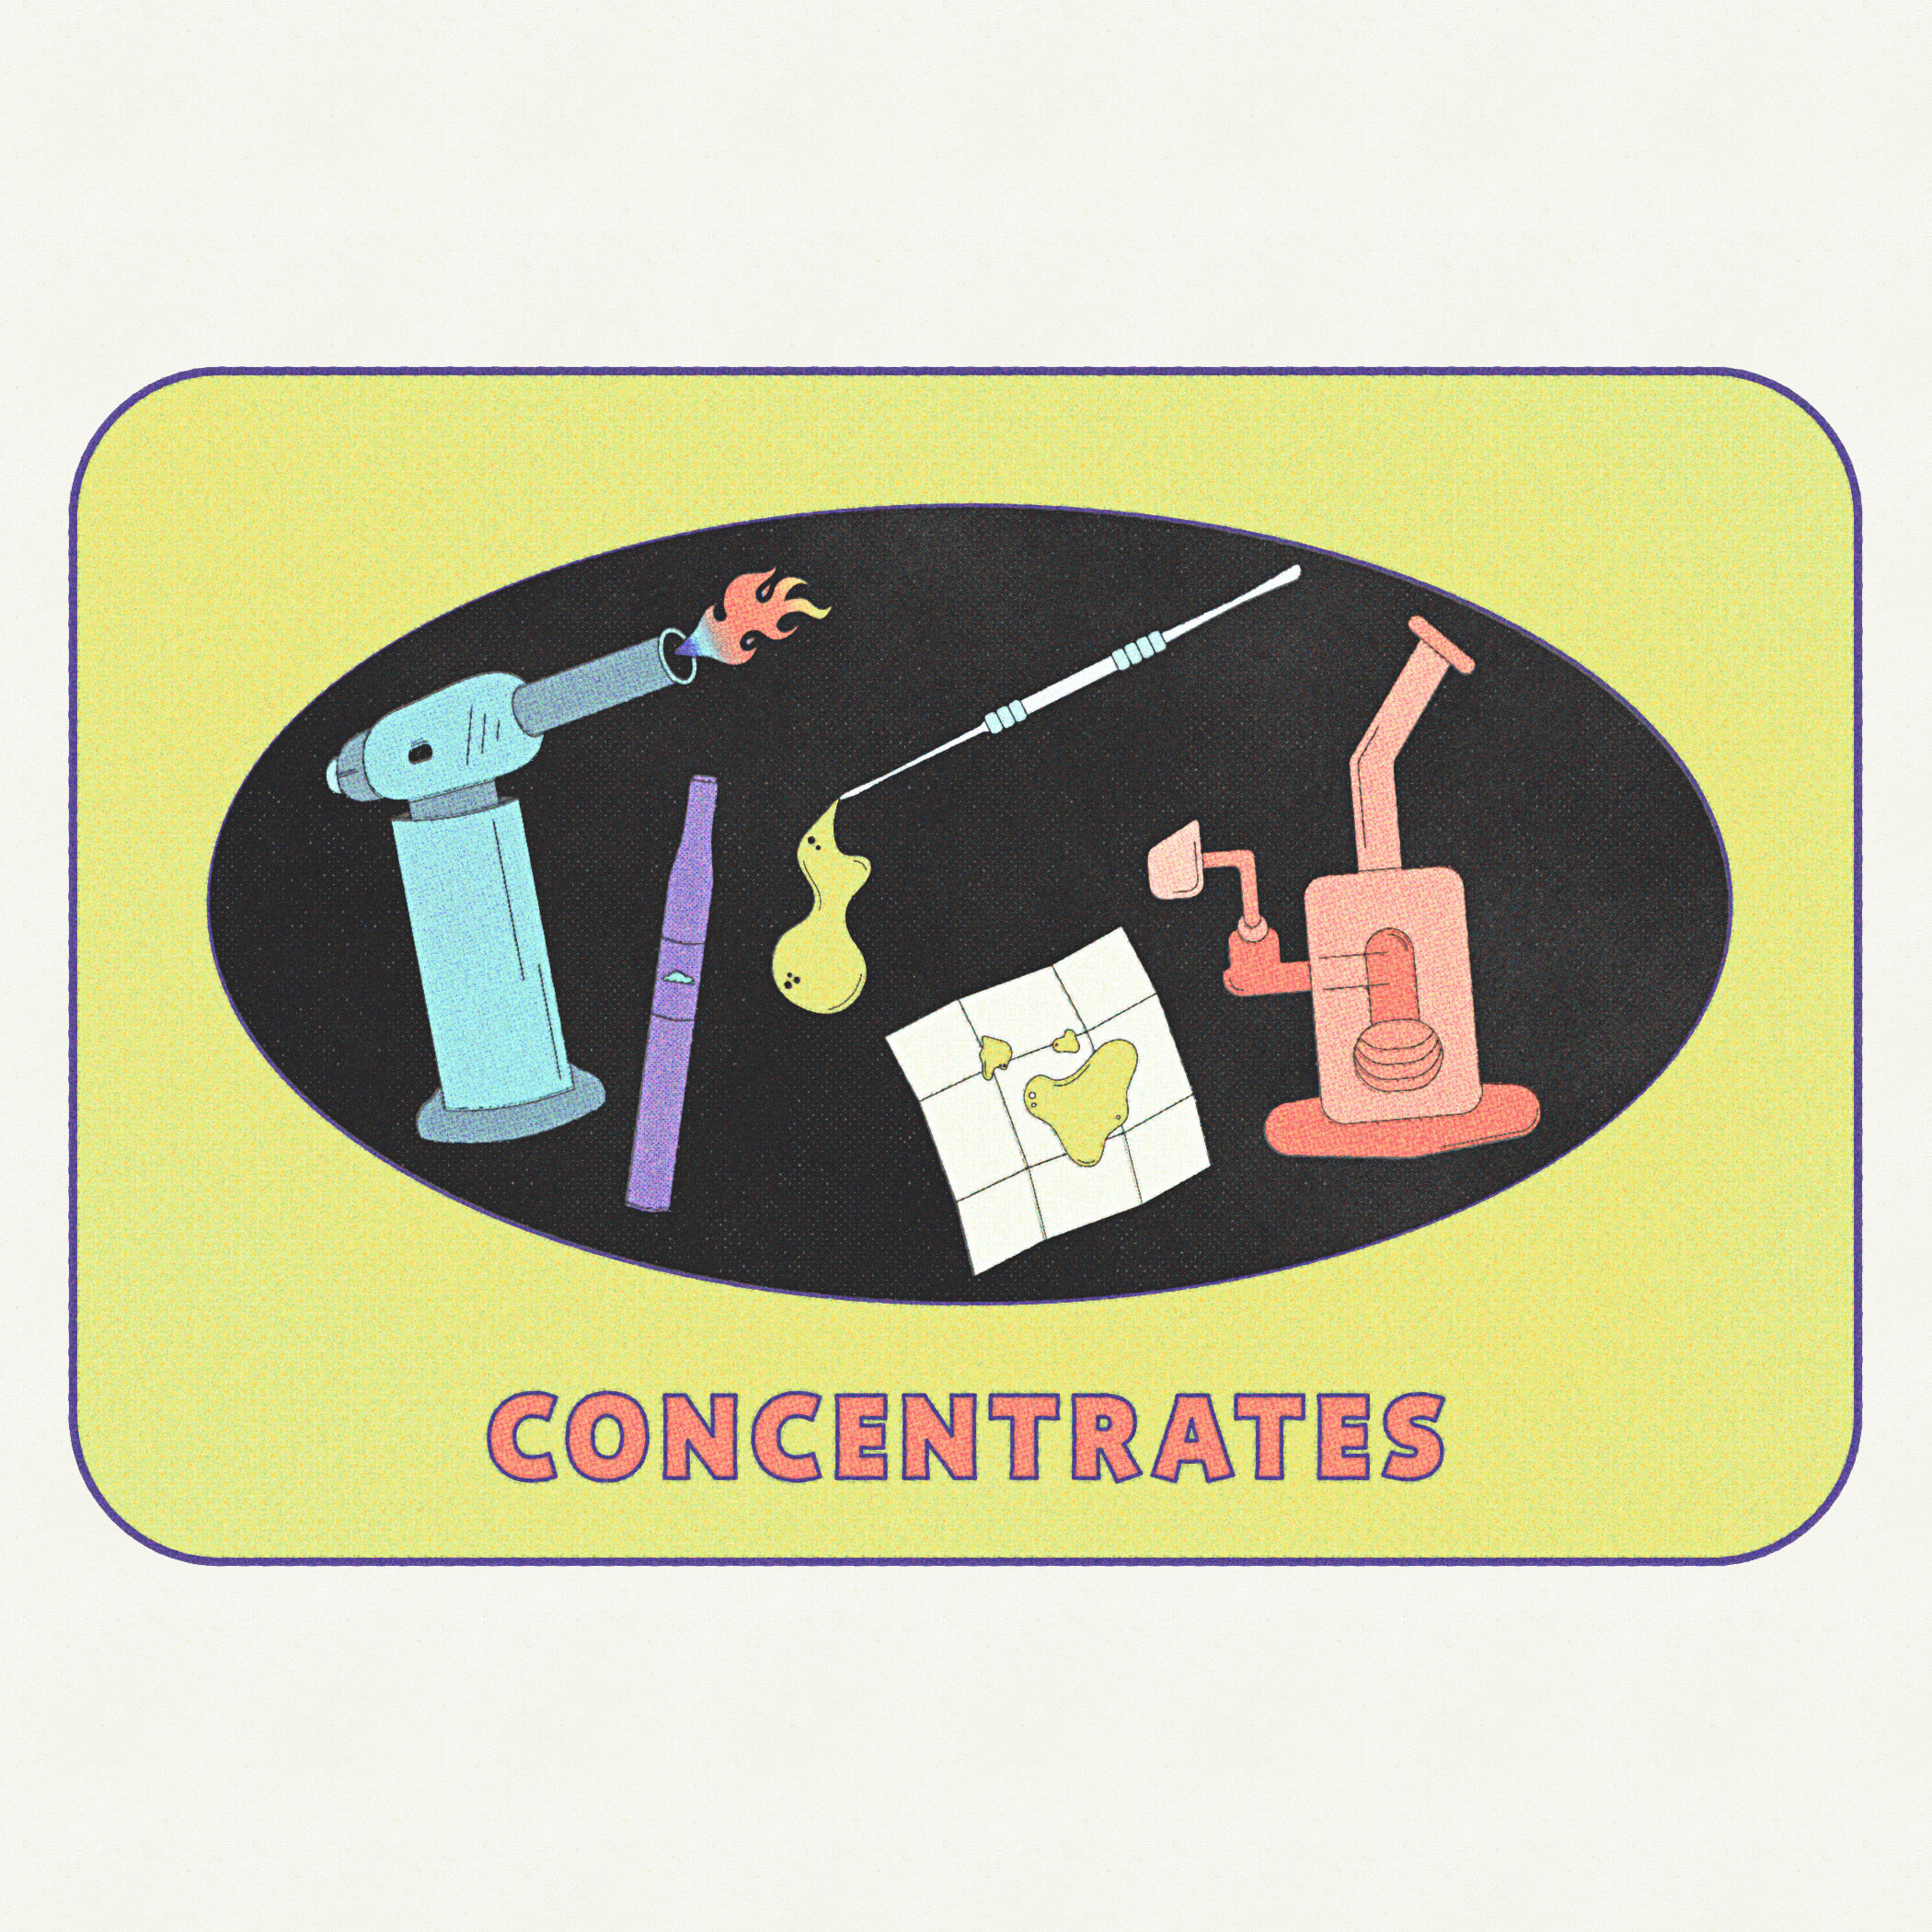 Article02-concentrates-front.jpg